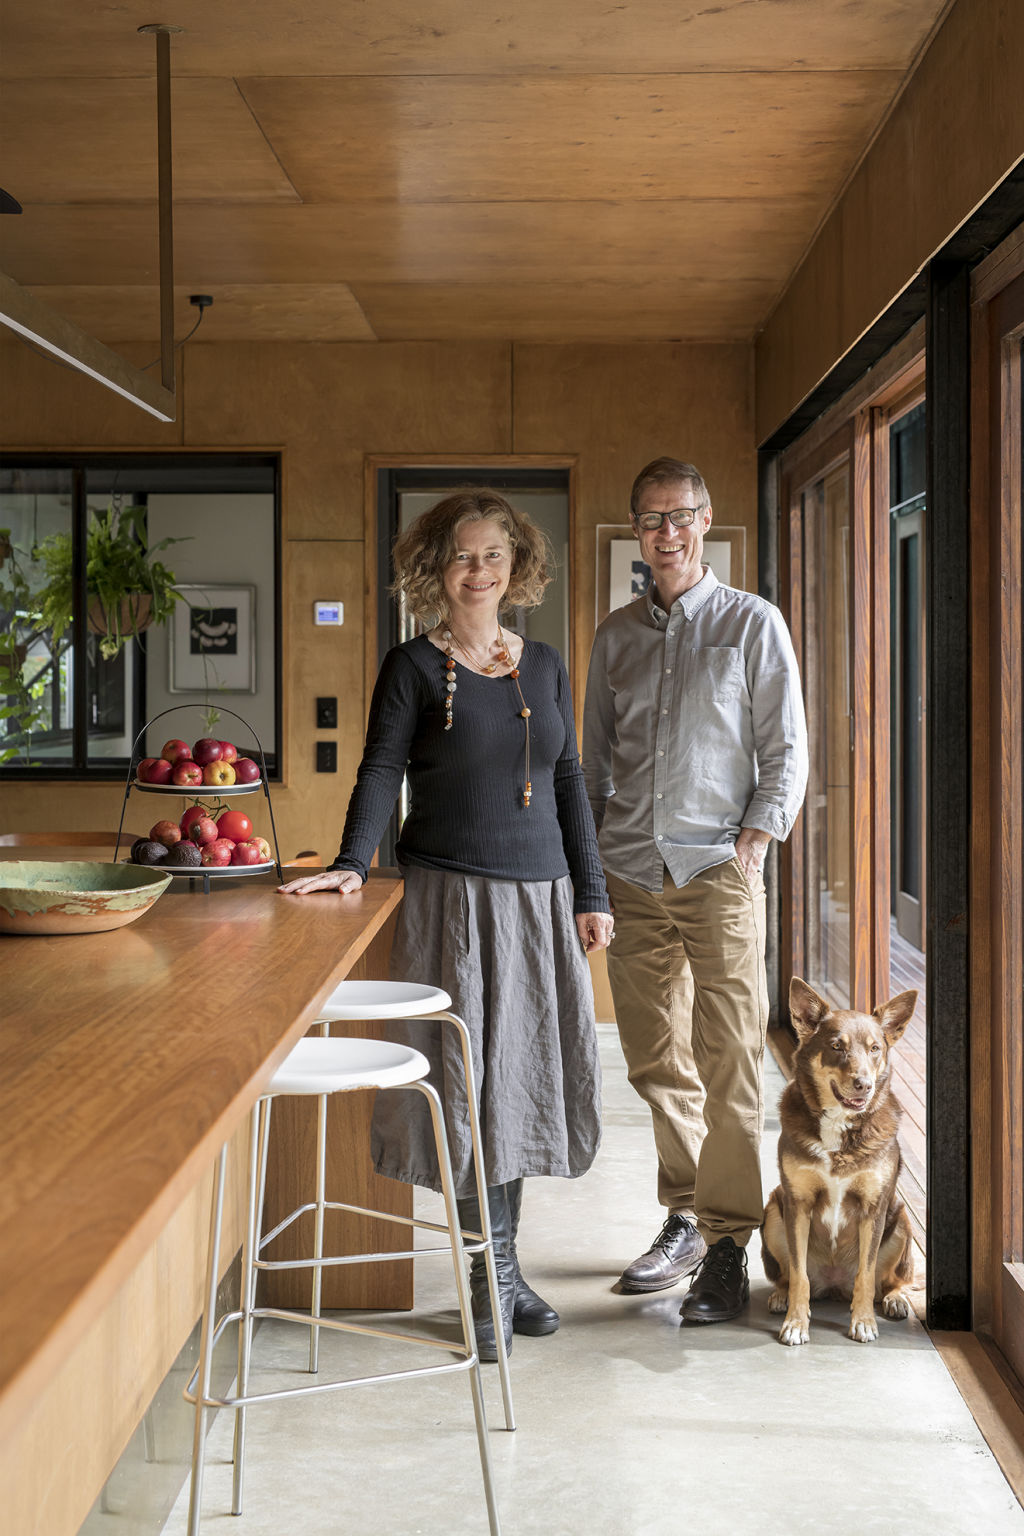 Architectural partners Sonia Graham and Chris Bligh have made a multi-functional home work for them, their staff and a tenant. Photo: Mindi Cooke